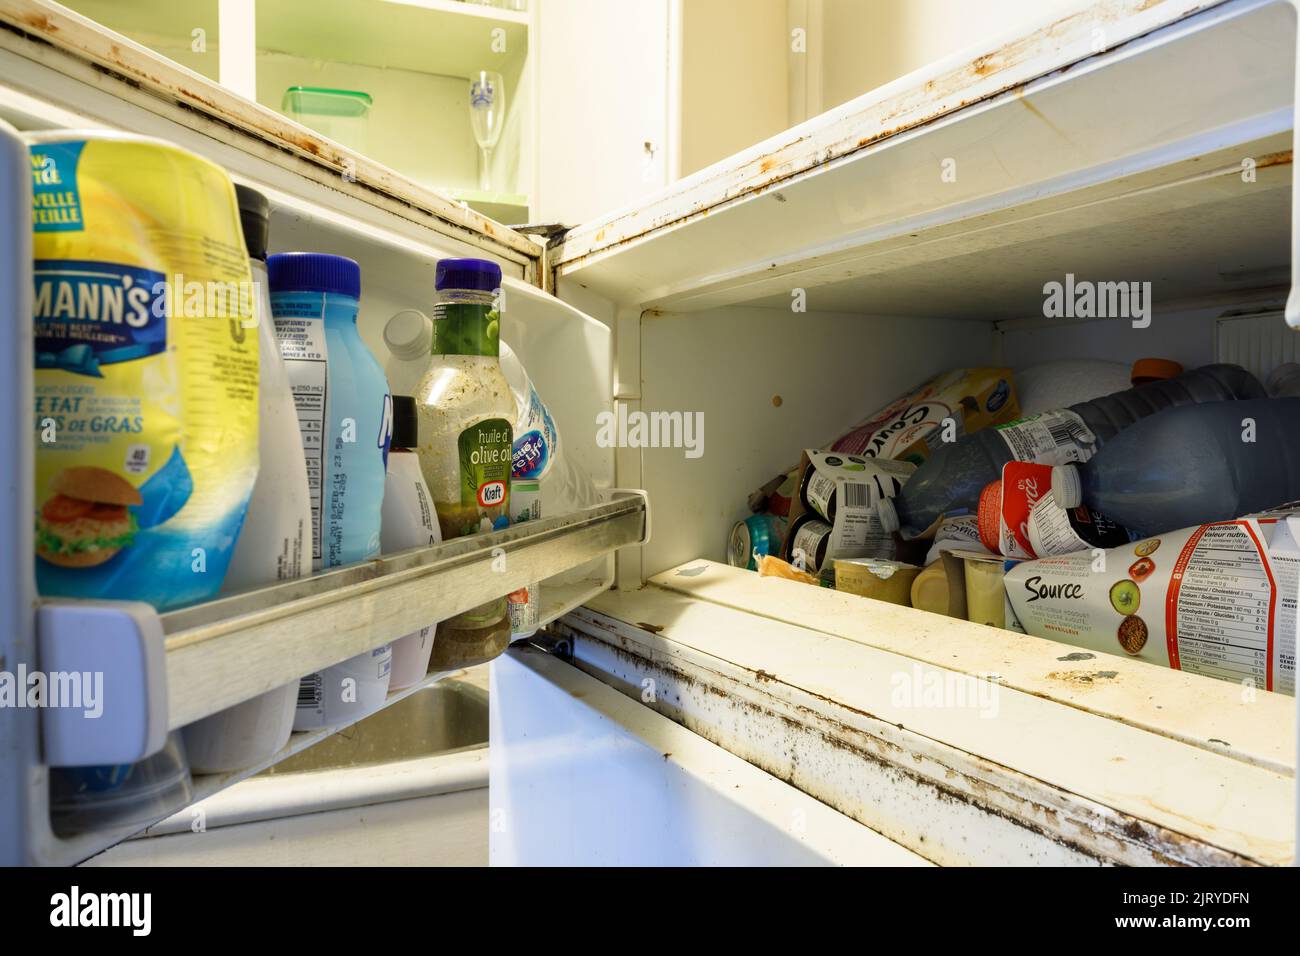 Various strange items in a dirty freezer. This building has since been demolished. Stock Photo